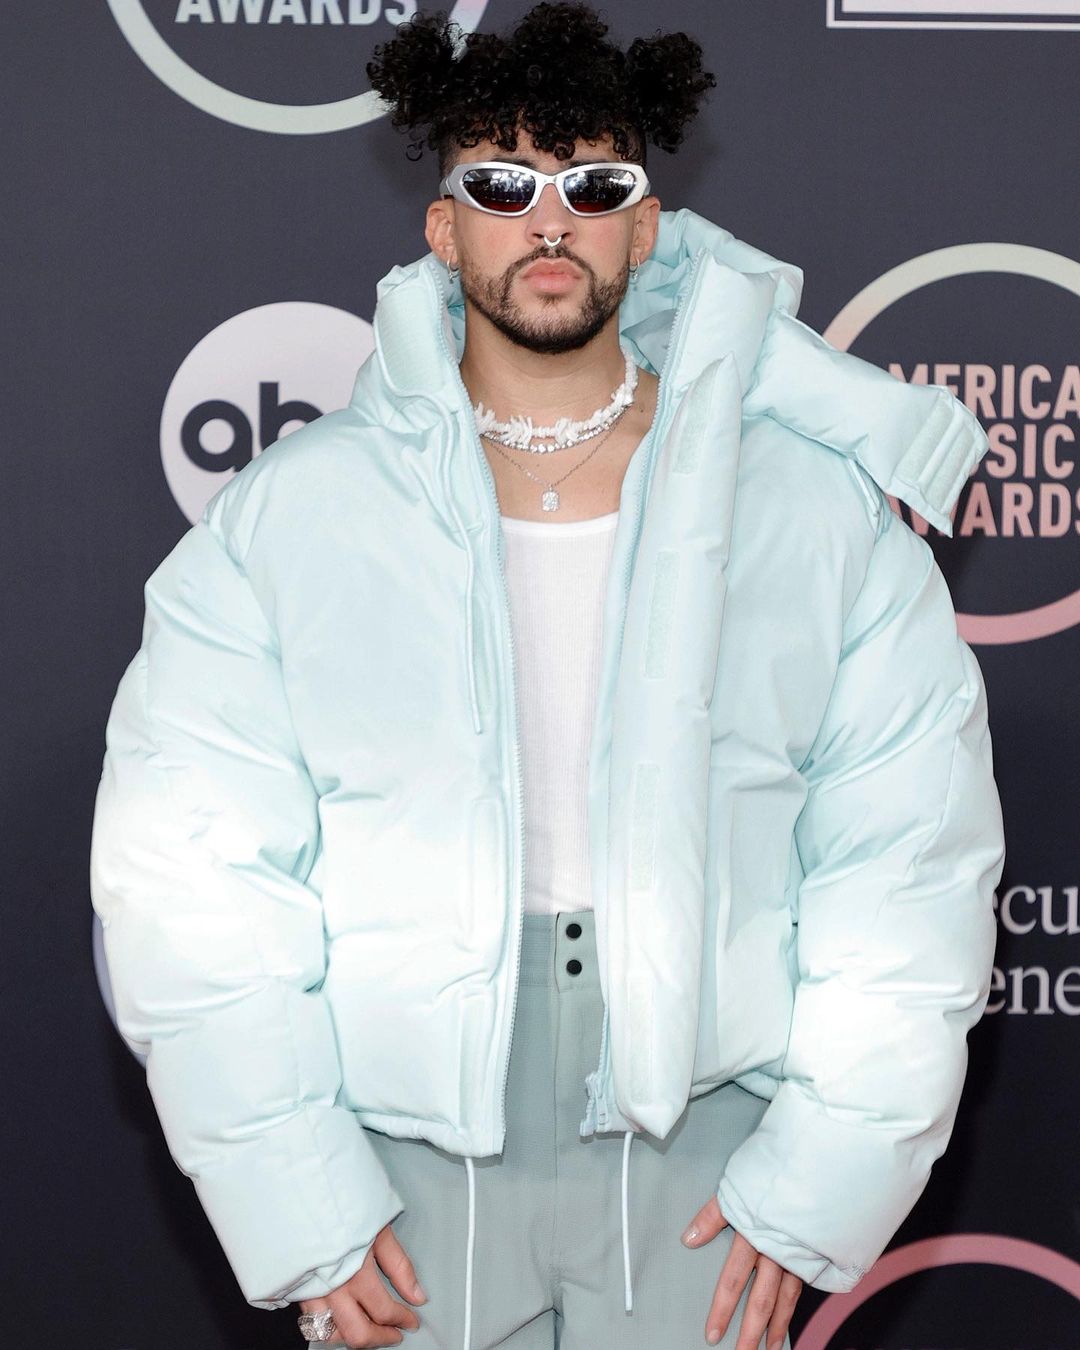 SPOTTED: Bad Bunny Attends the AMAs in Balenciaga & entire studios – PAUSE  Online | Men's Fashion, Street Style, Fashion News & Streetwear